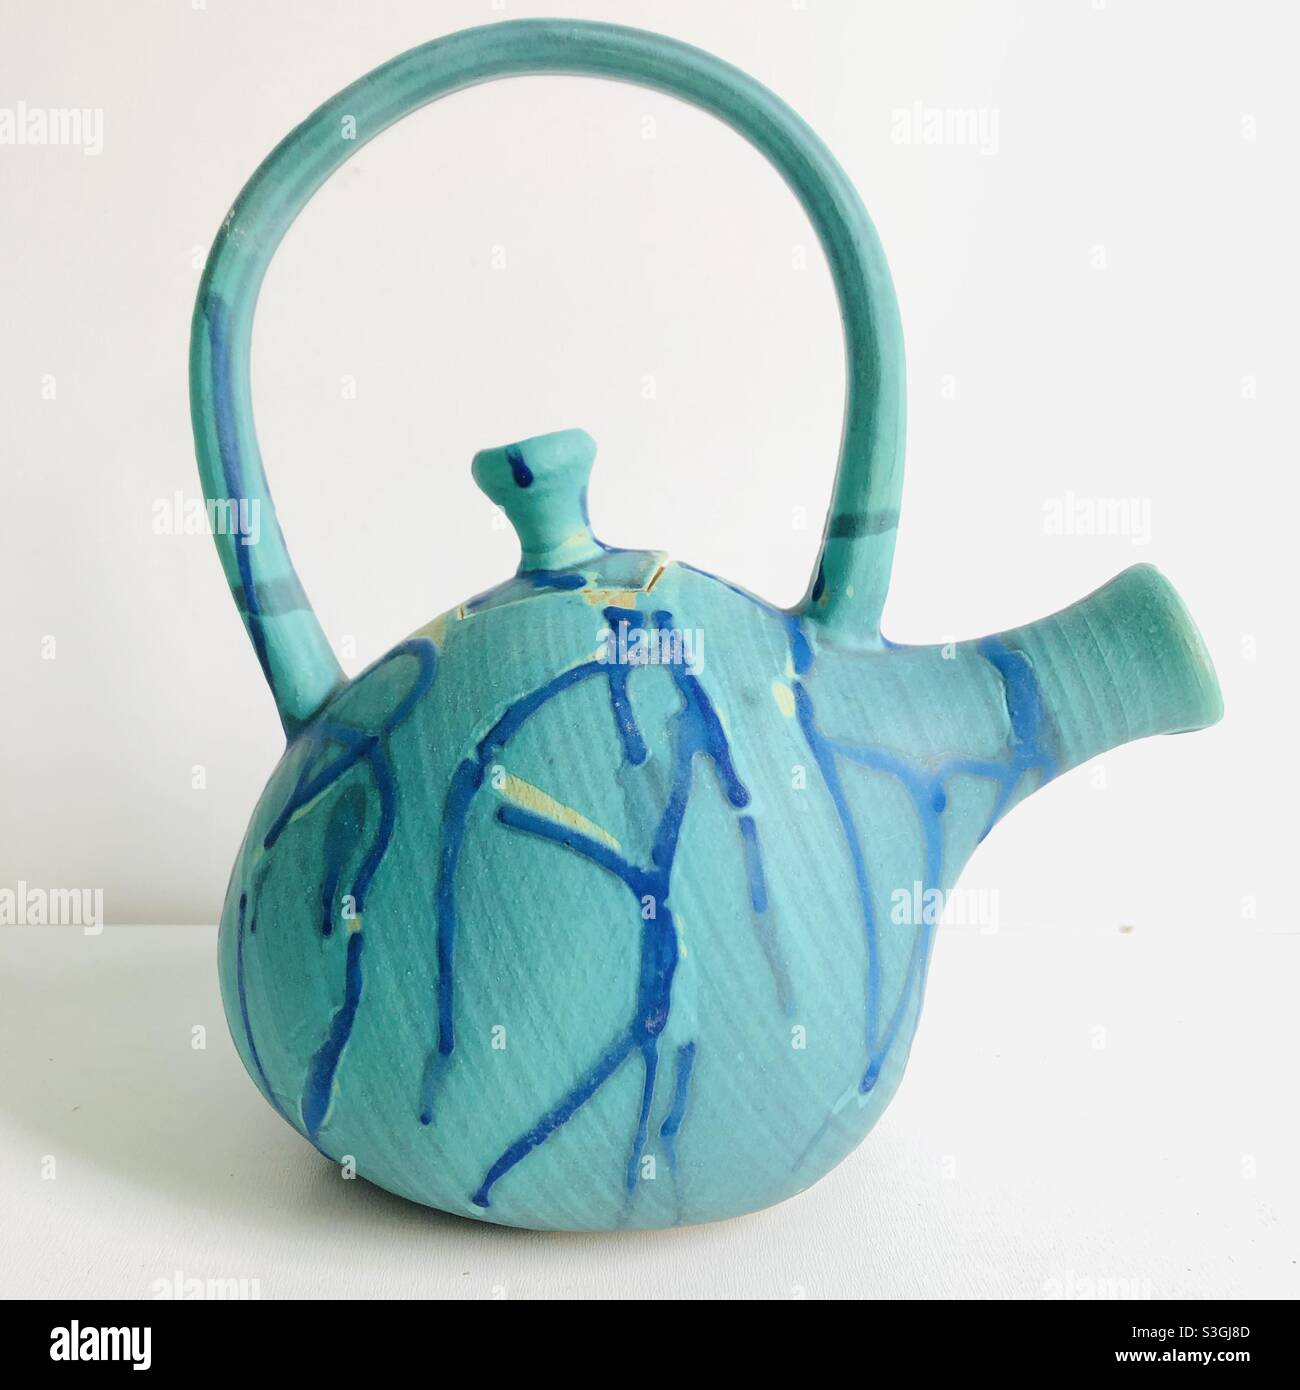 Handmade teapot made of turquoise teal and blue clay ready for getting together Stock Photo